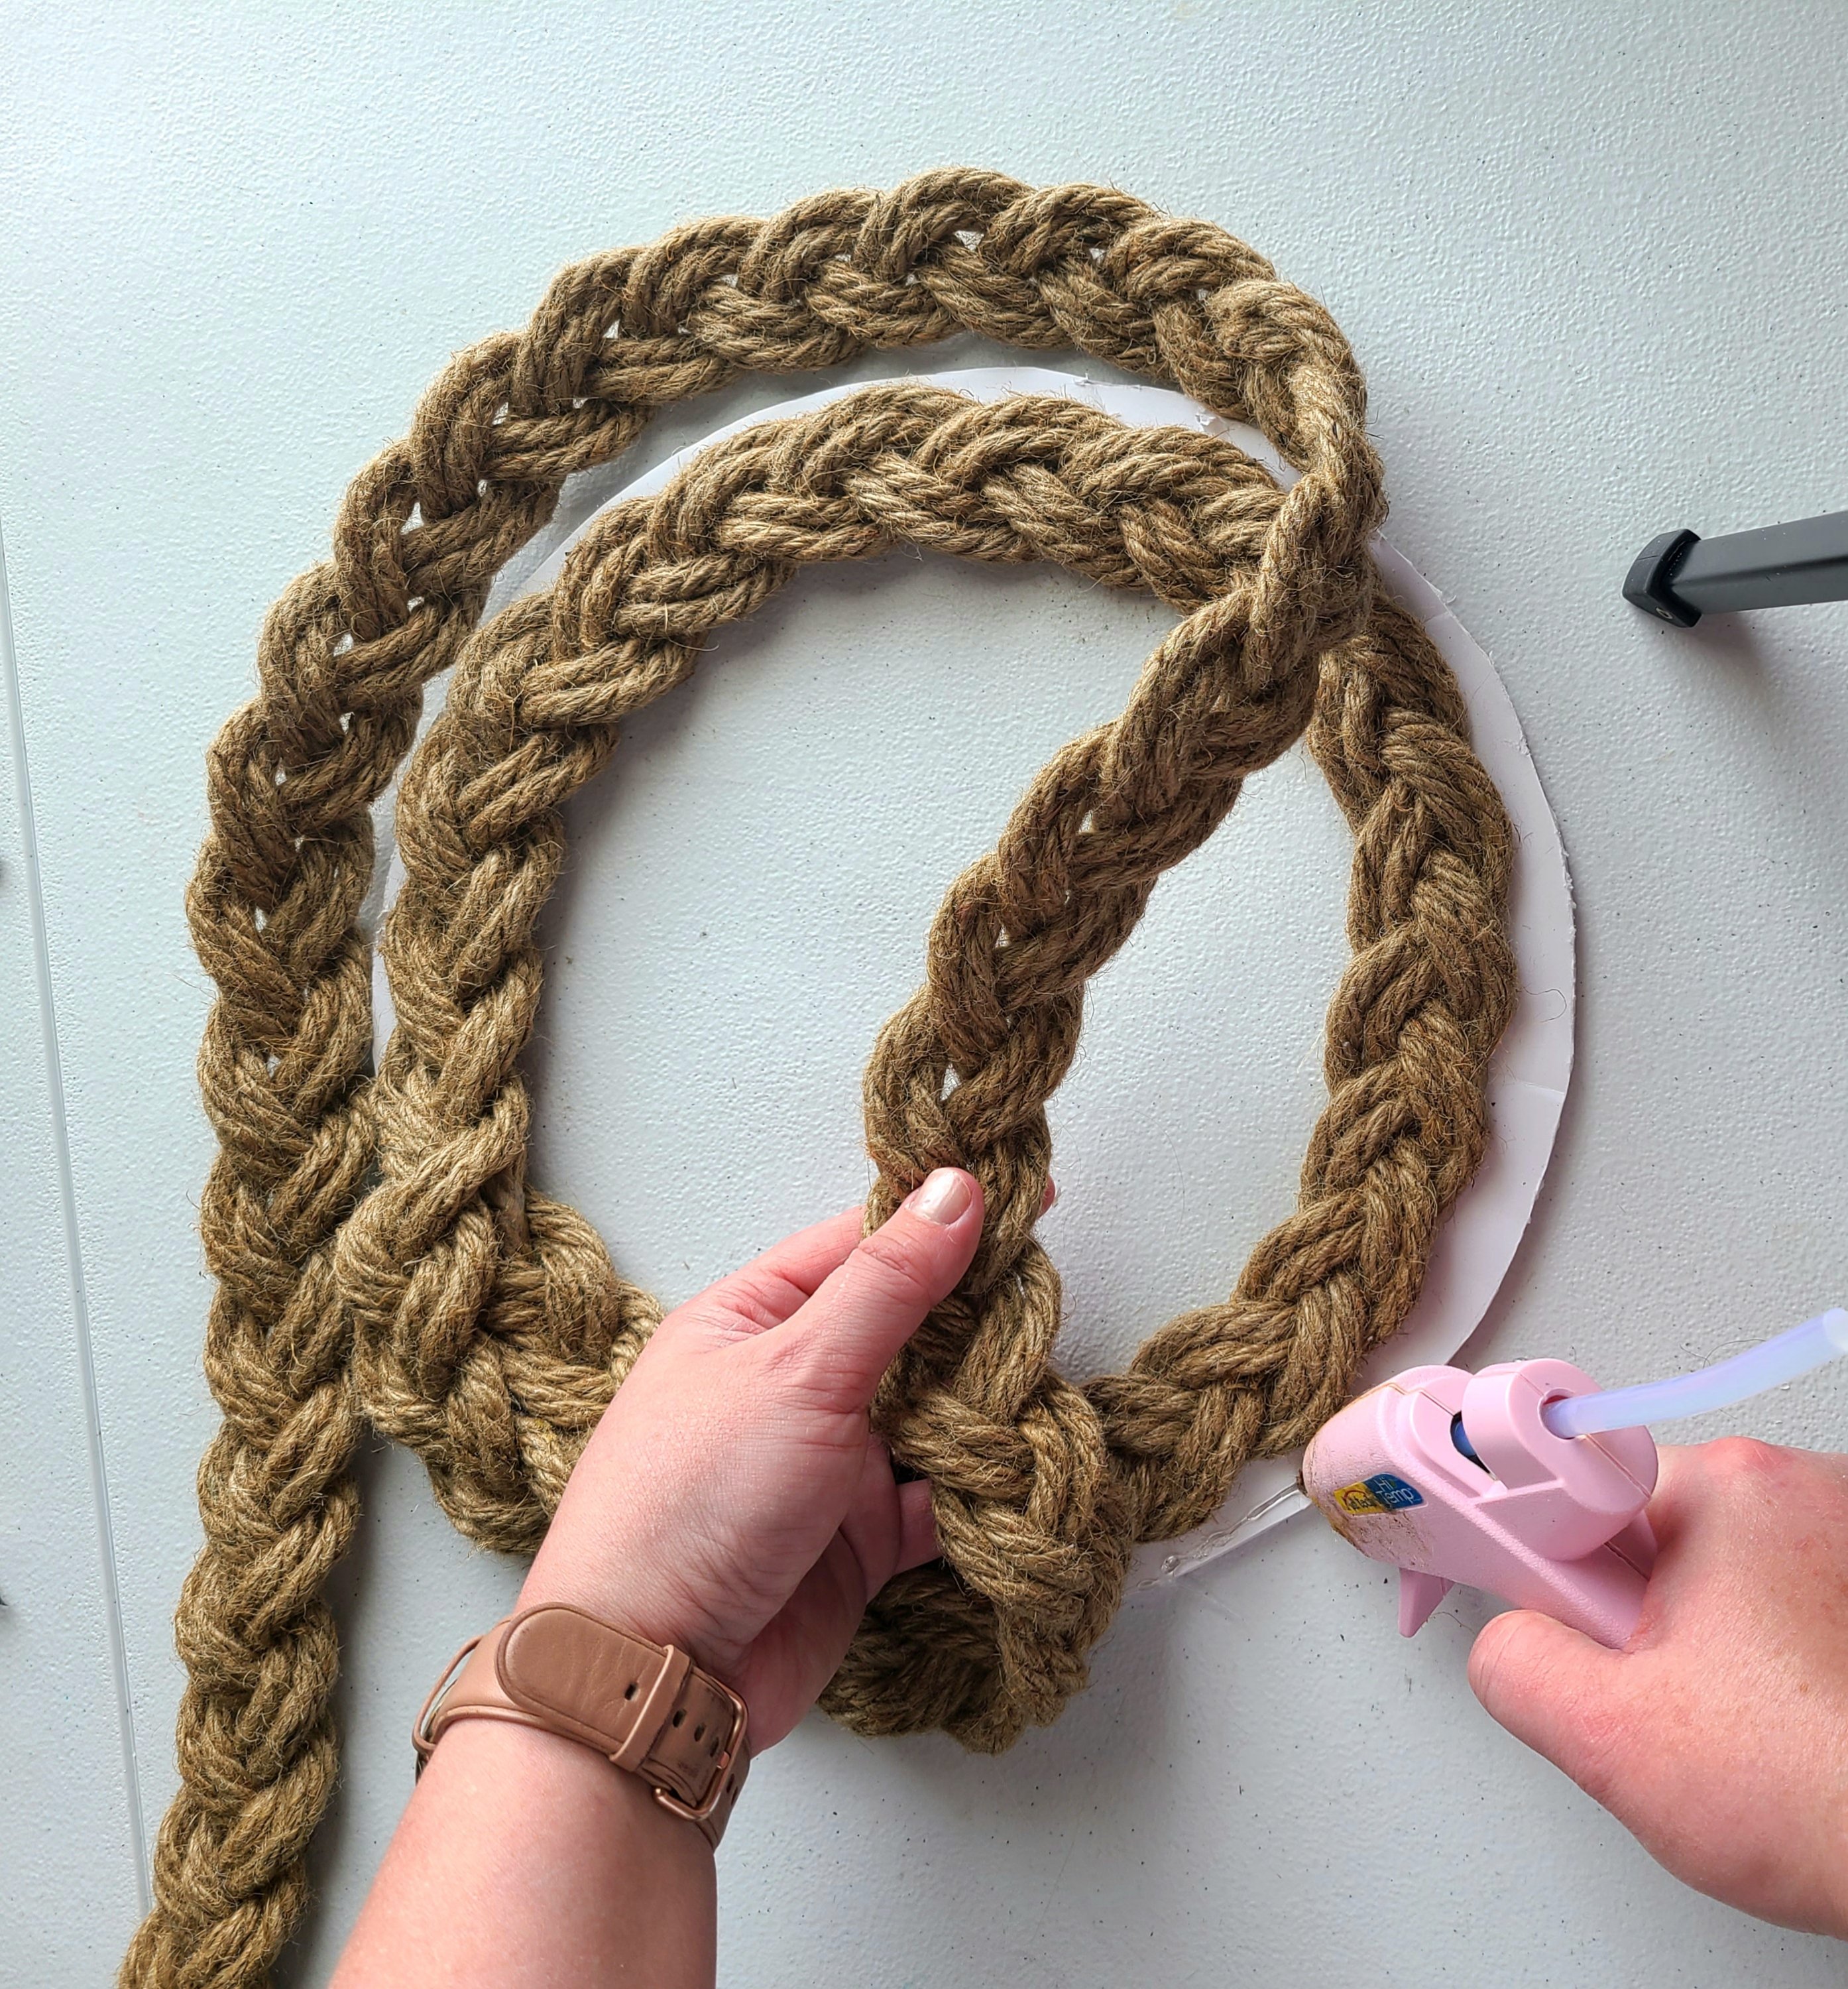 Putting hot glue on the outside of the wreath form to place the braided rope on as a 2nd row.